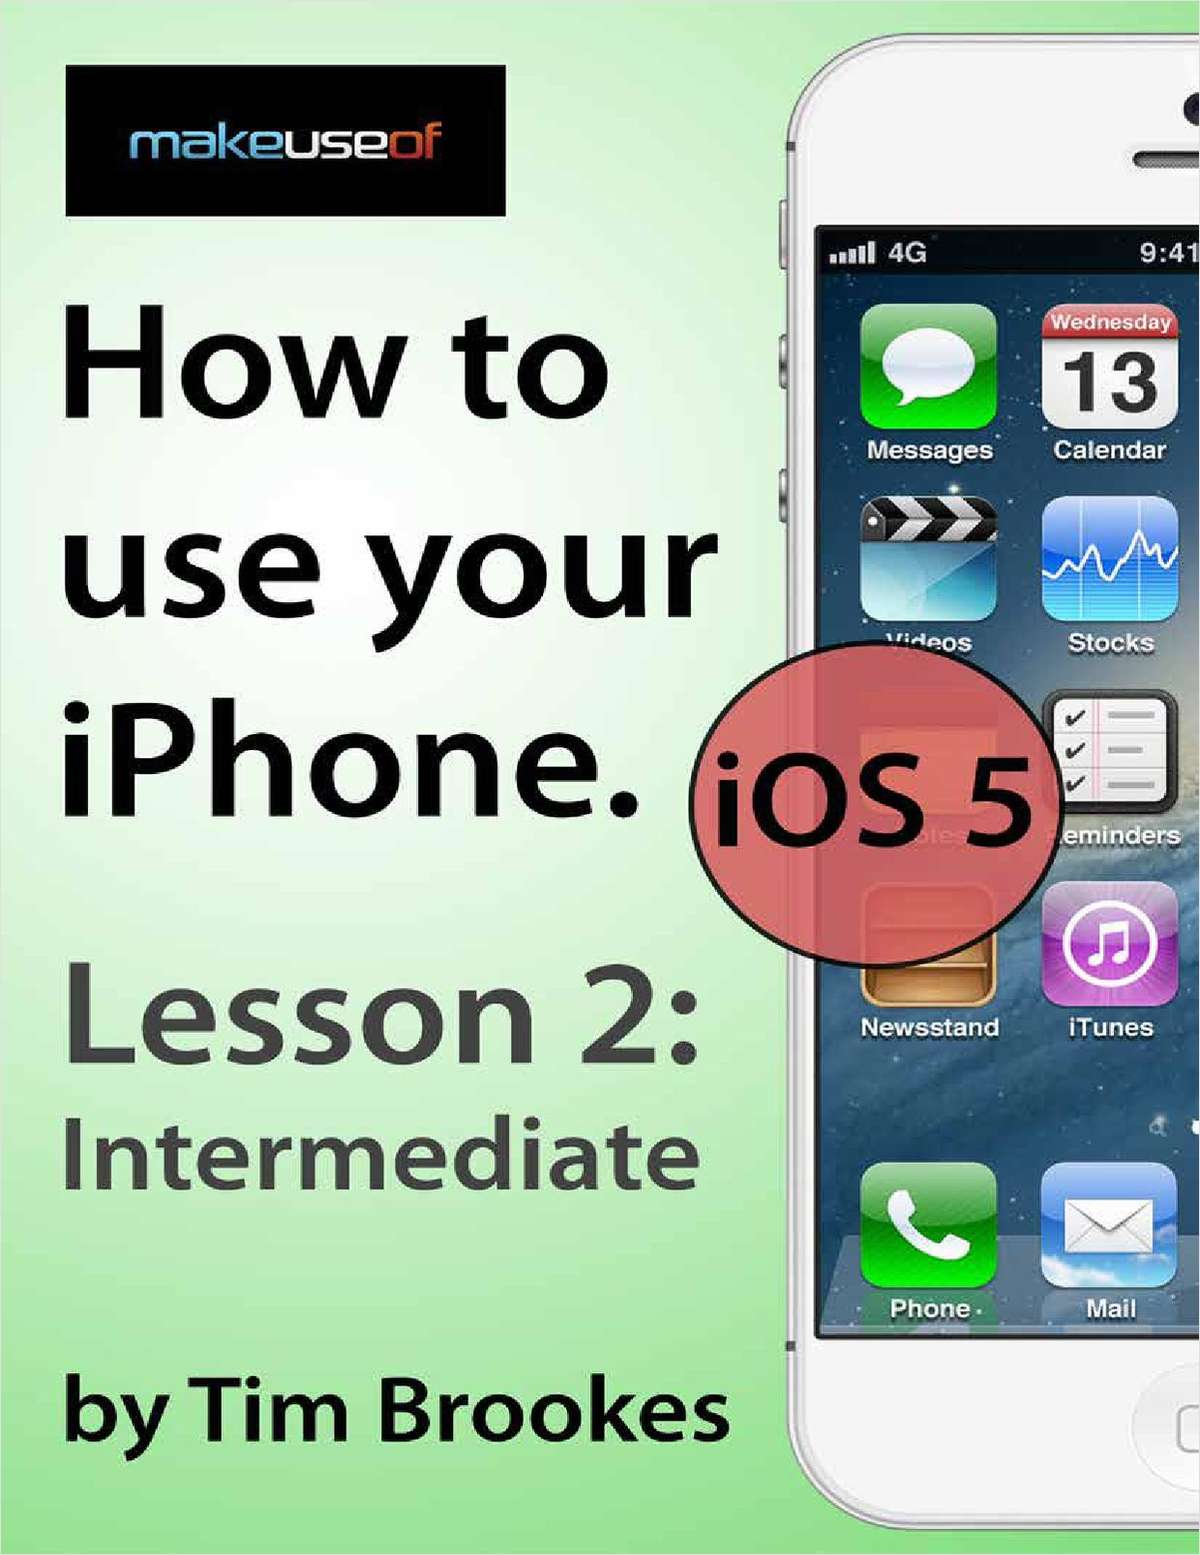 How To Use Your iPhone iOS5: Lesson 2 Intermediate